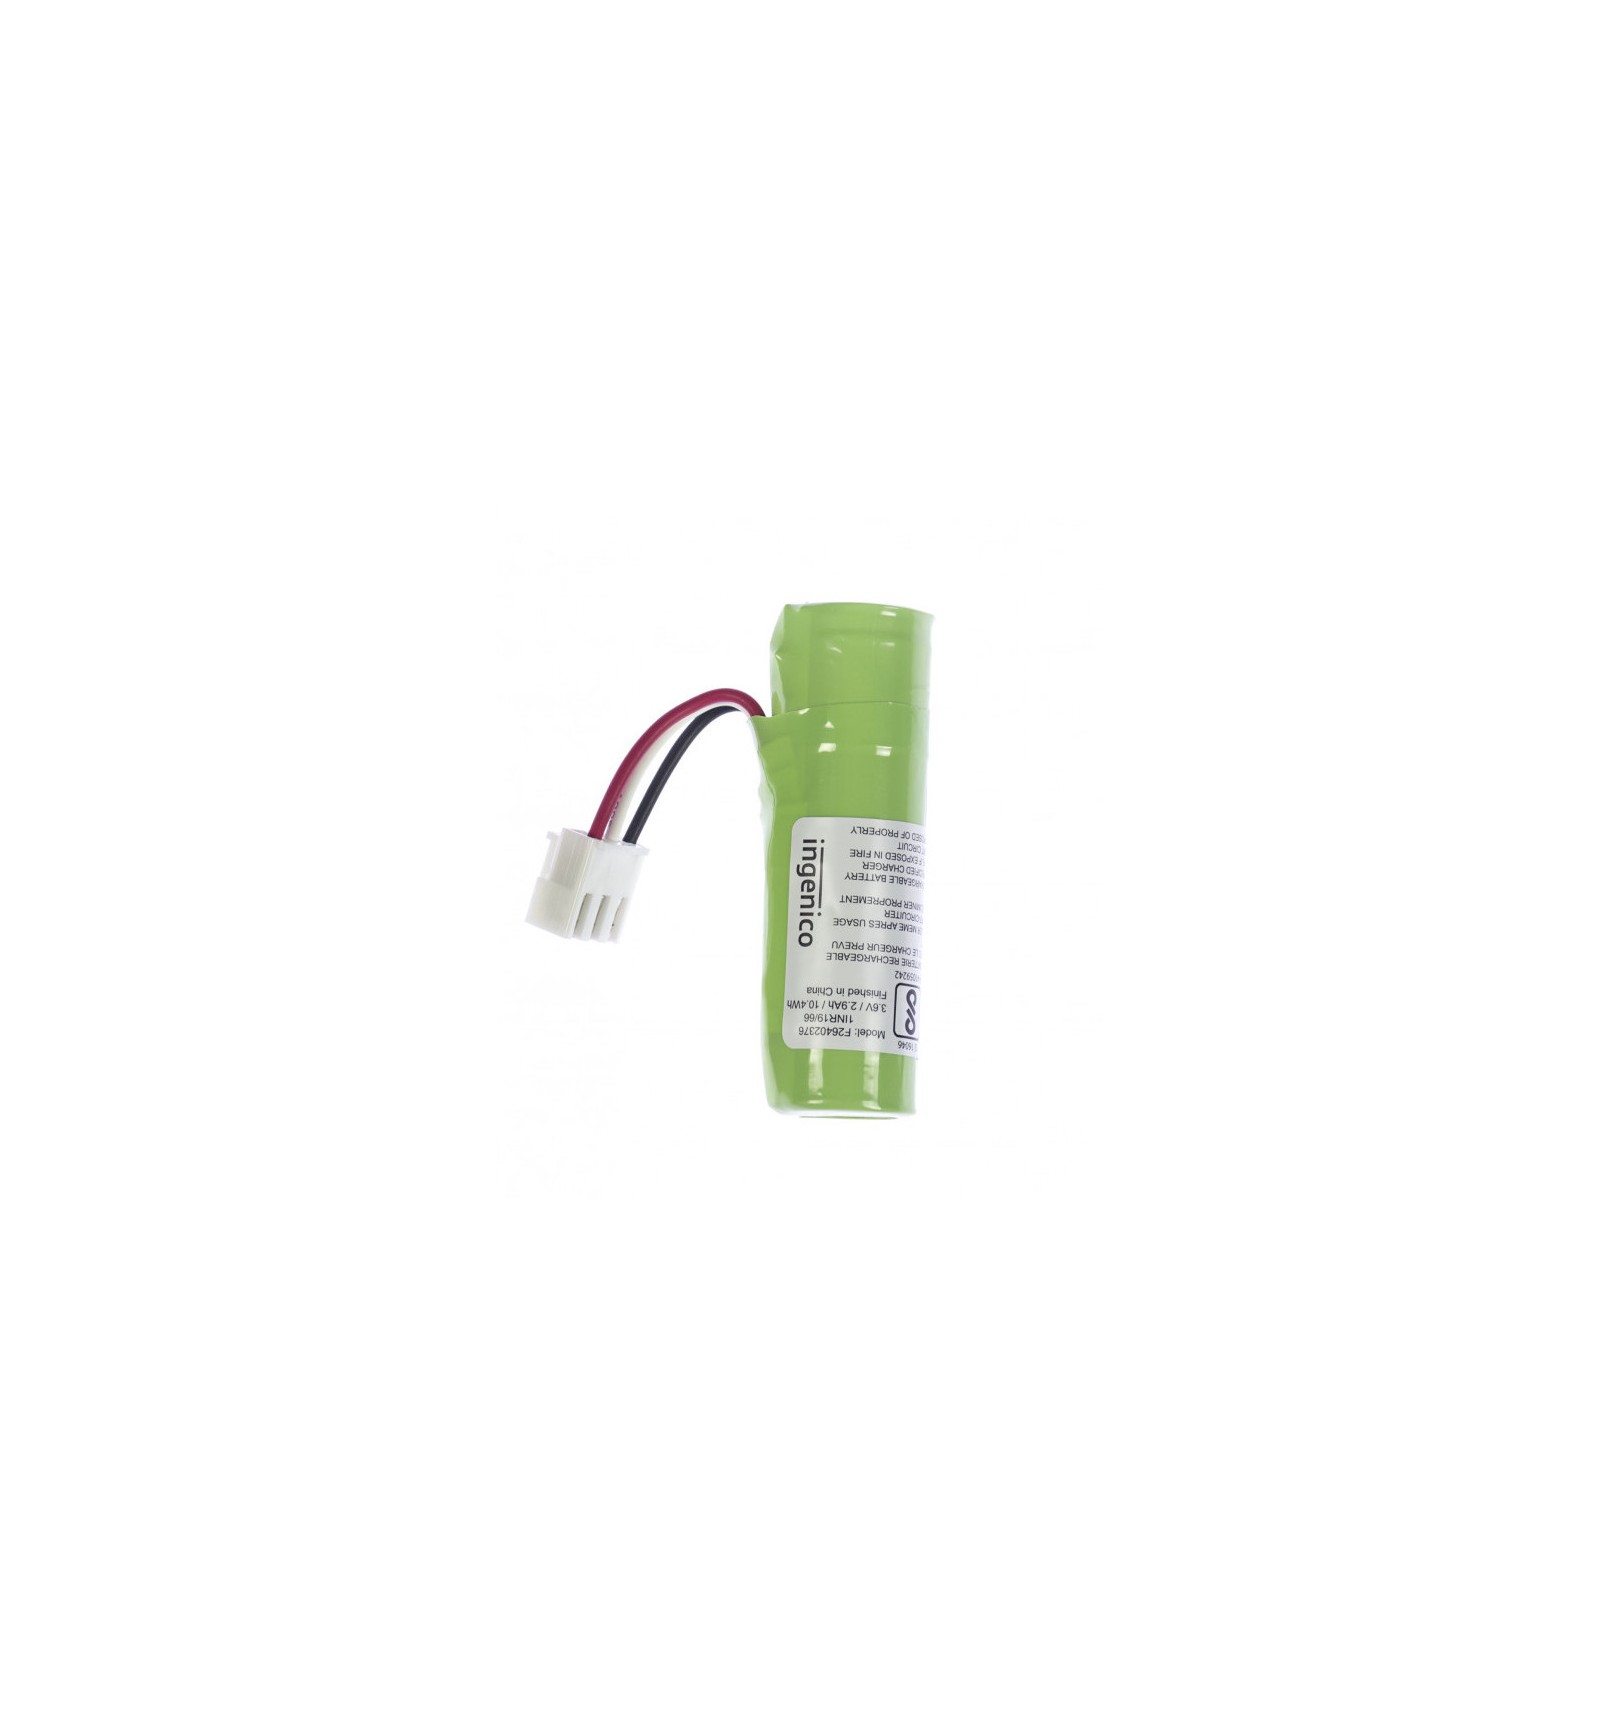 Batterie Rechargeable pour Ingenico iWL250, 3,7V, Li-ION